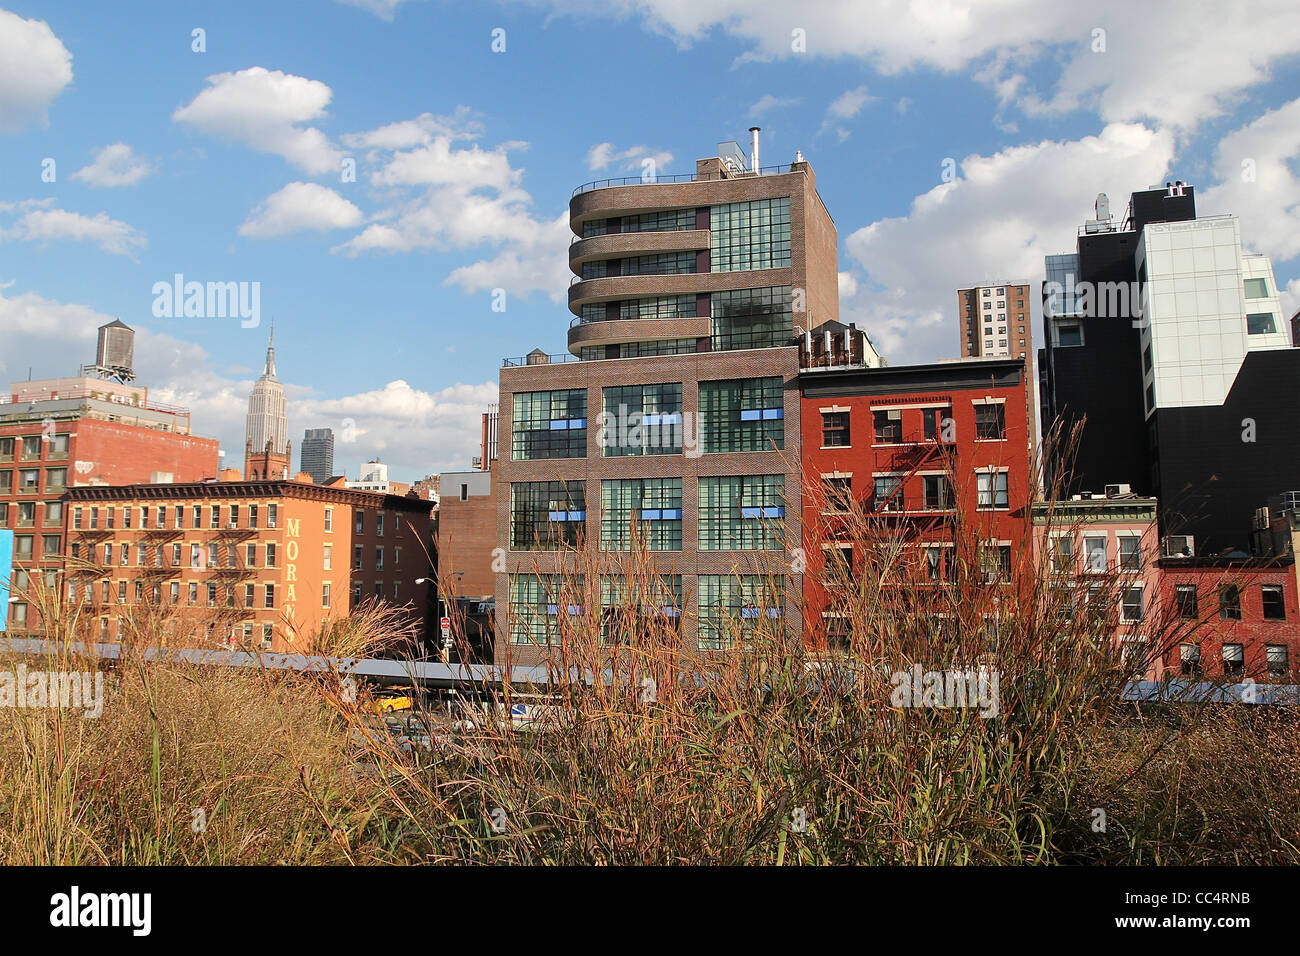 A view of Chelsea buildings, from High Line Park in New York City Stock Photo